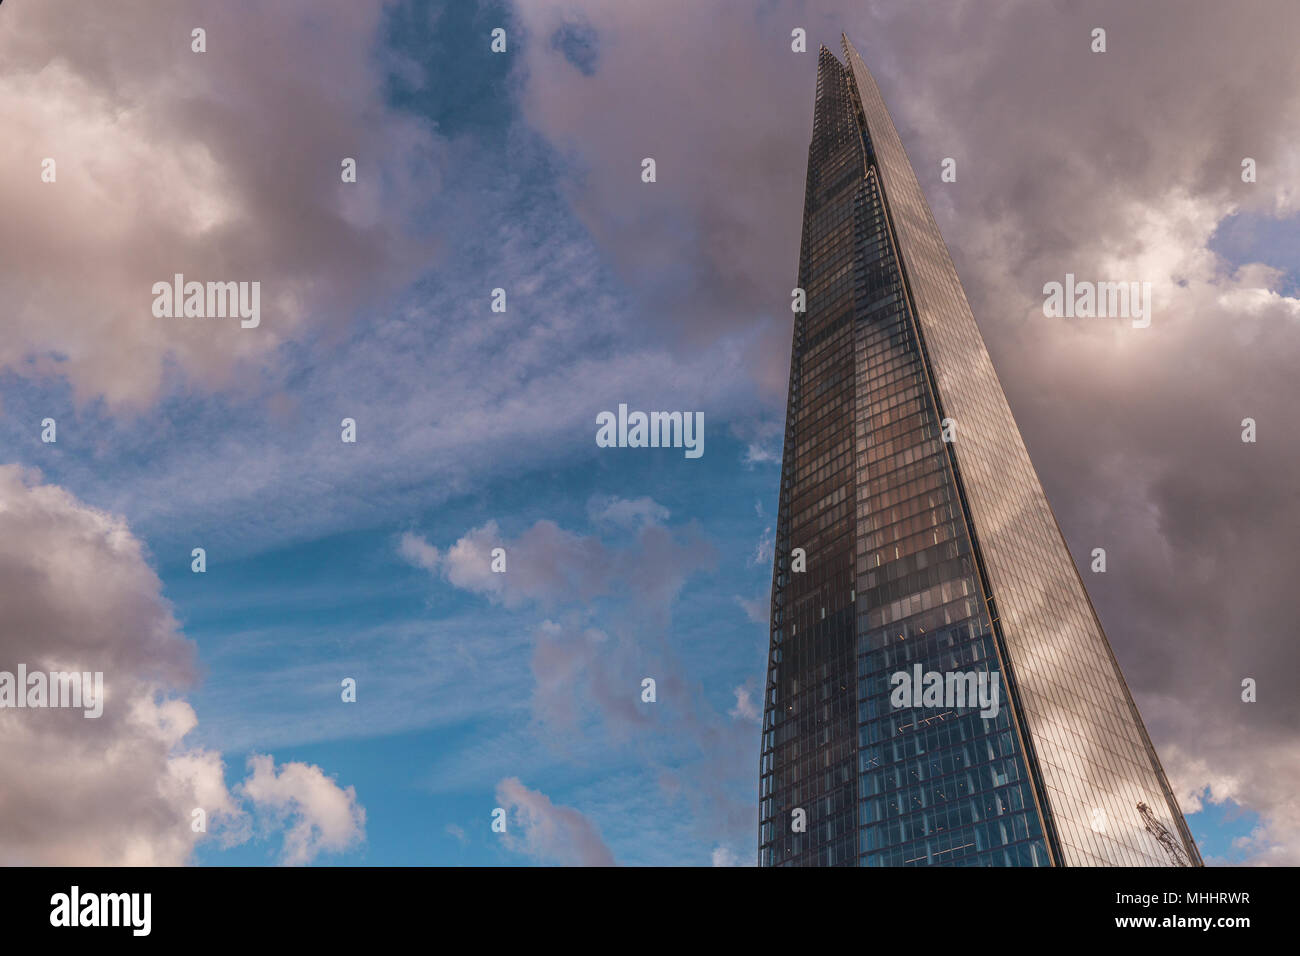 LONDON - APRIL 26, 2018: The Shard skyscraper building in London with blue sky and white clouds Stock Photo